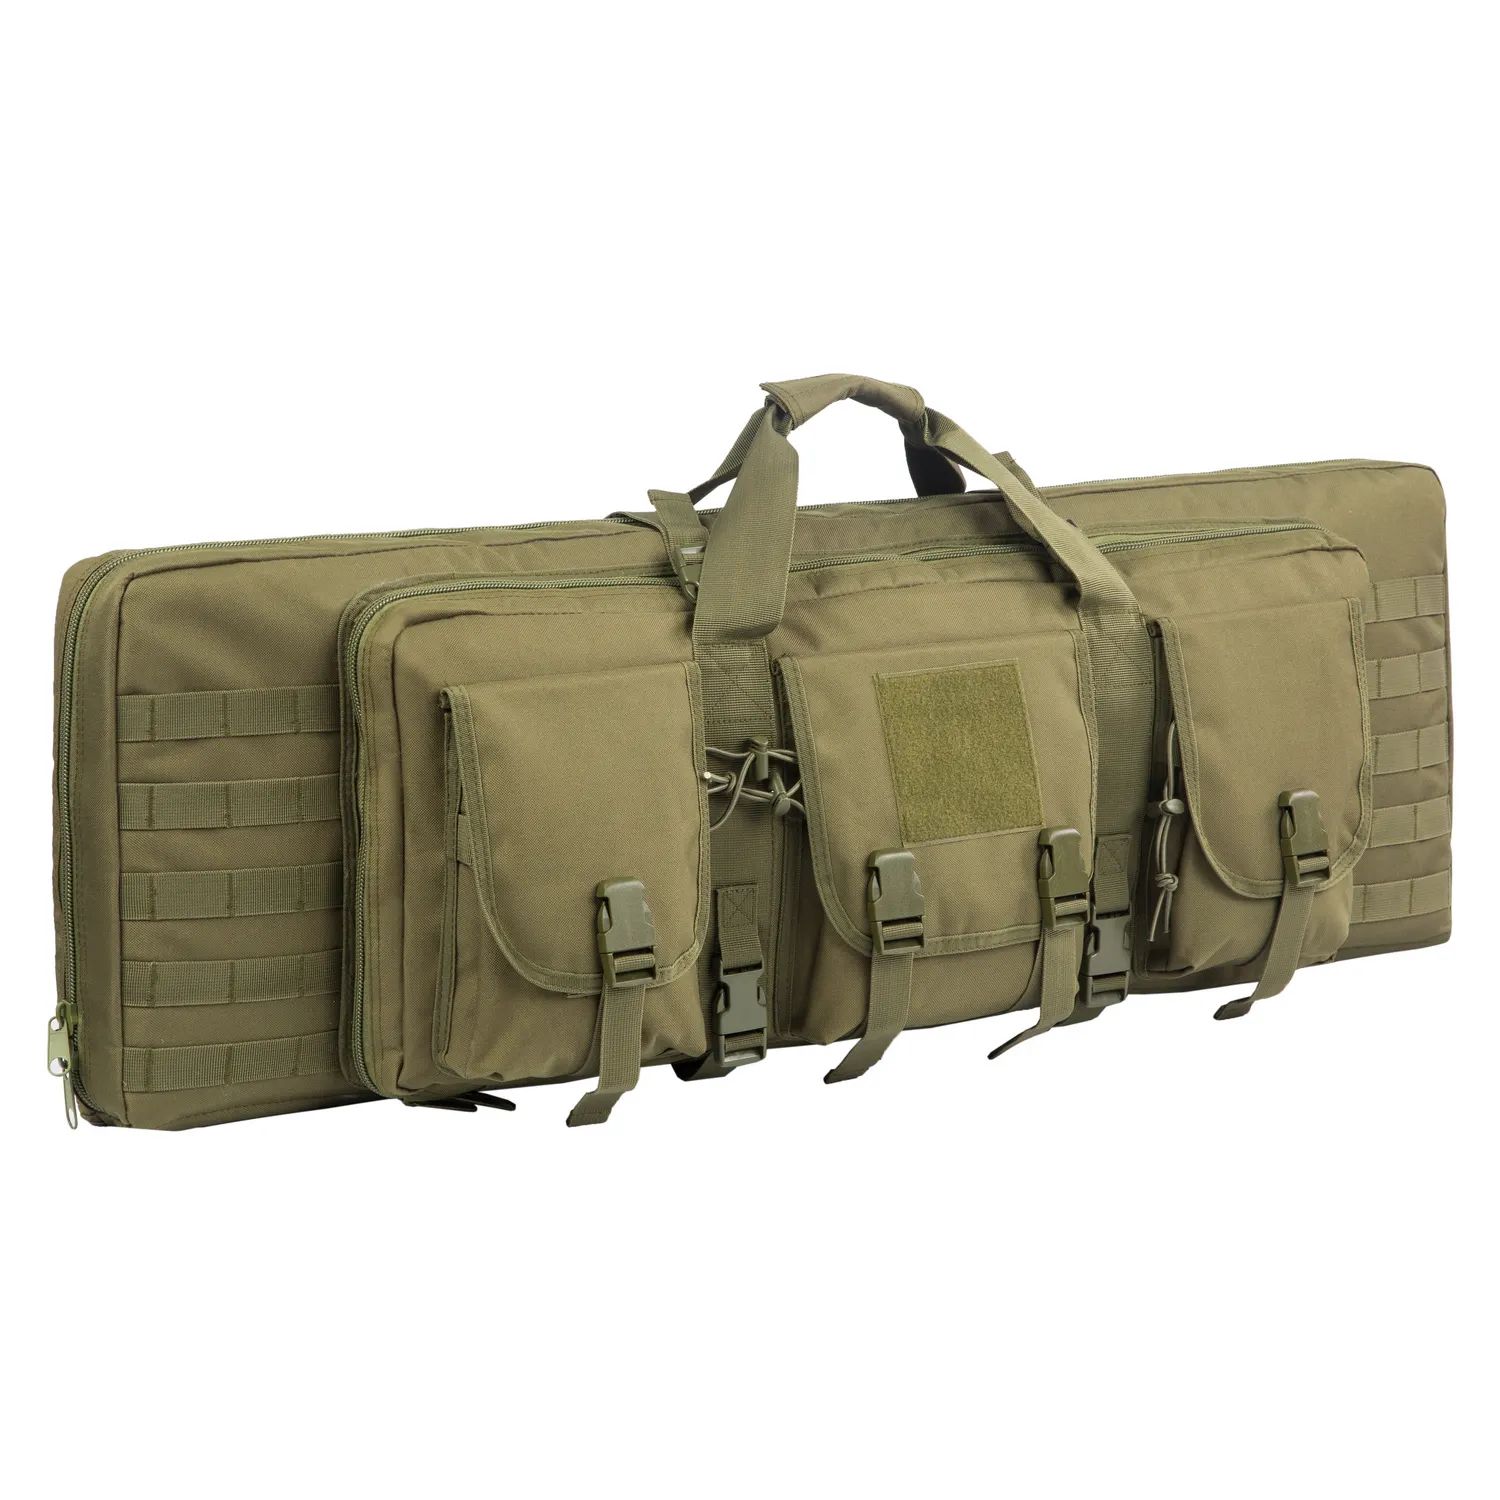 Special Design Widely Used Popular Portable Double Outdoor Tactical Case Backpack Bag